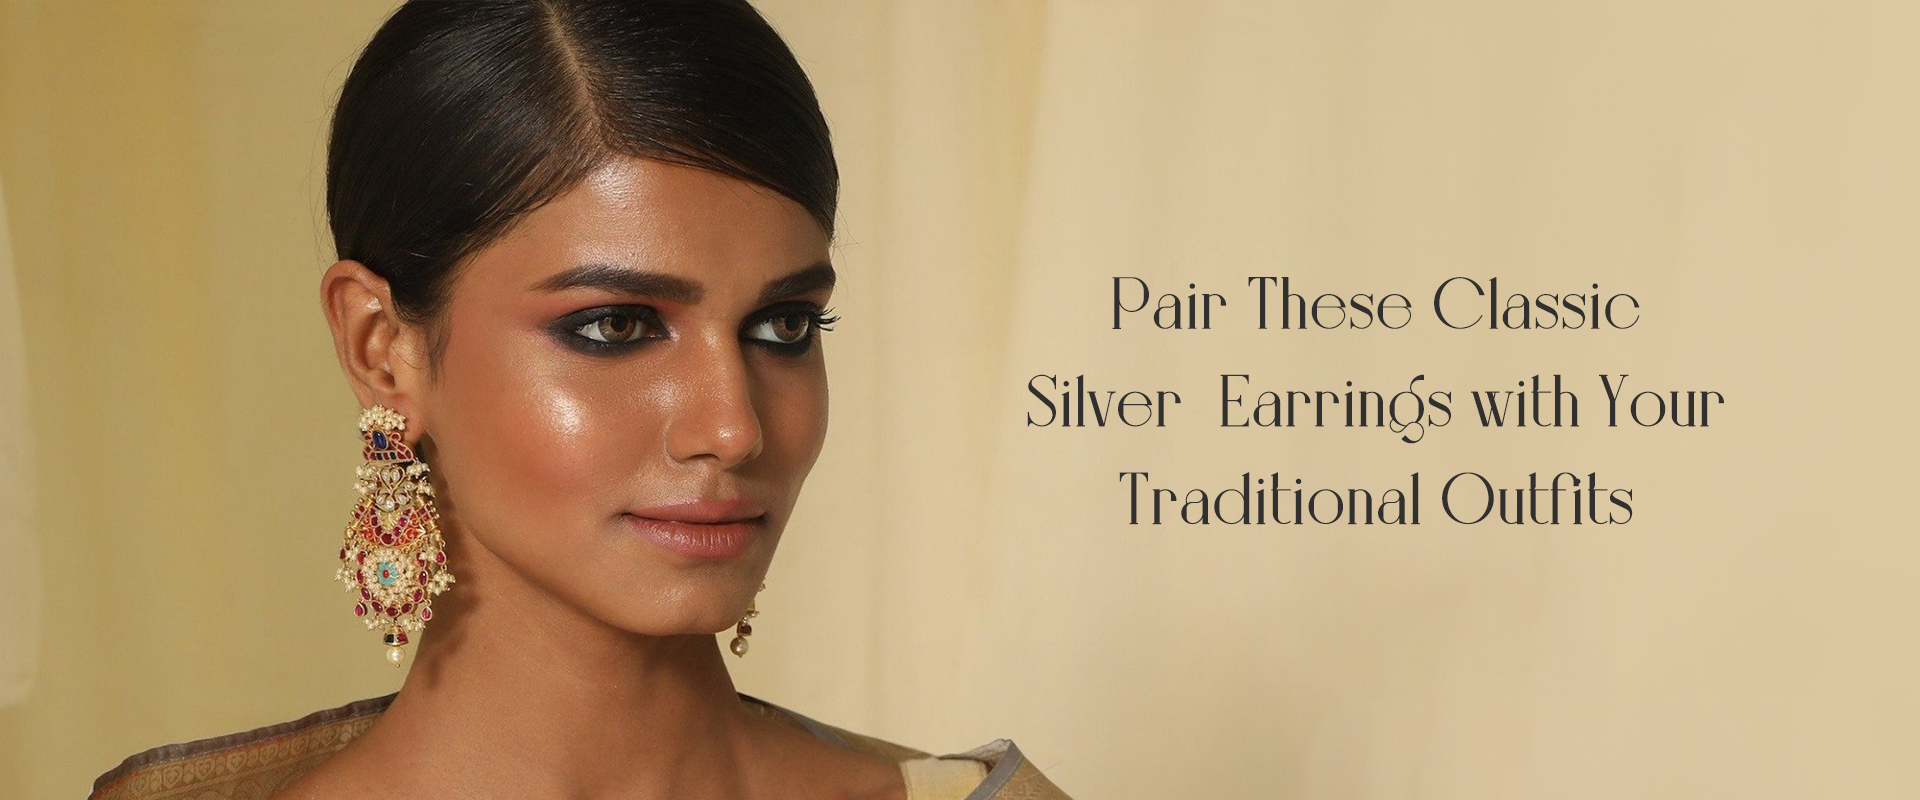 Pair These Classic Silver Earrings with Your Traditional Outfits